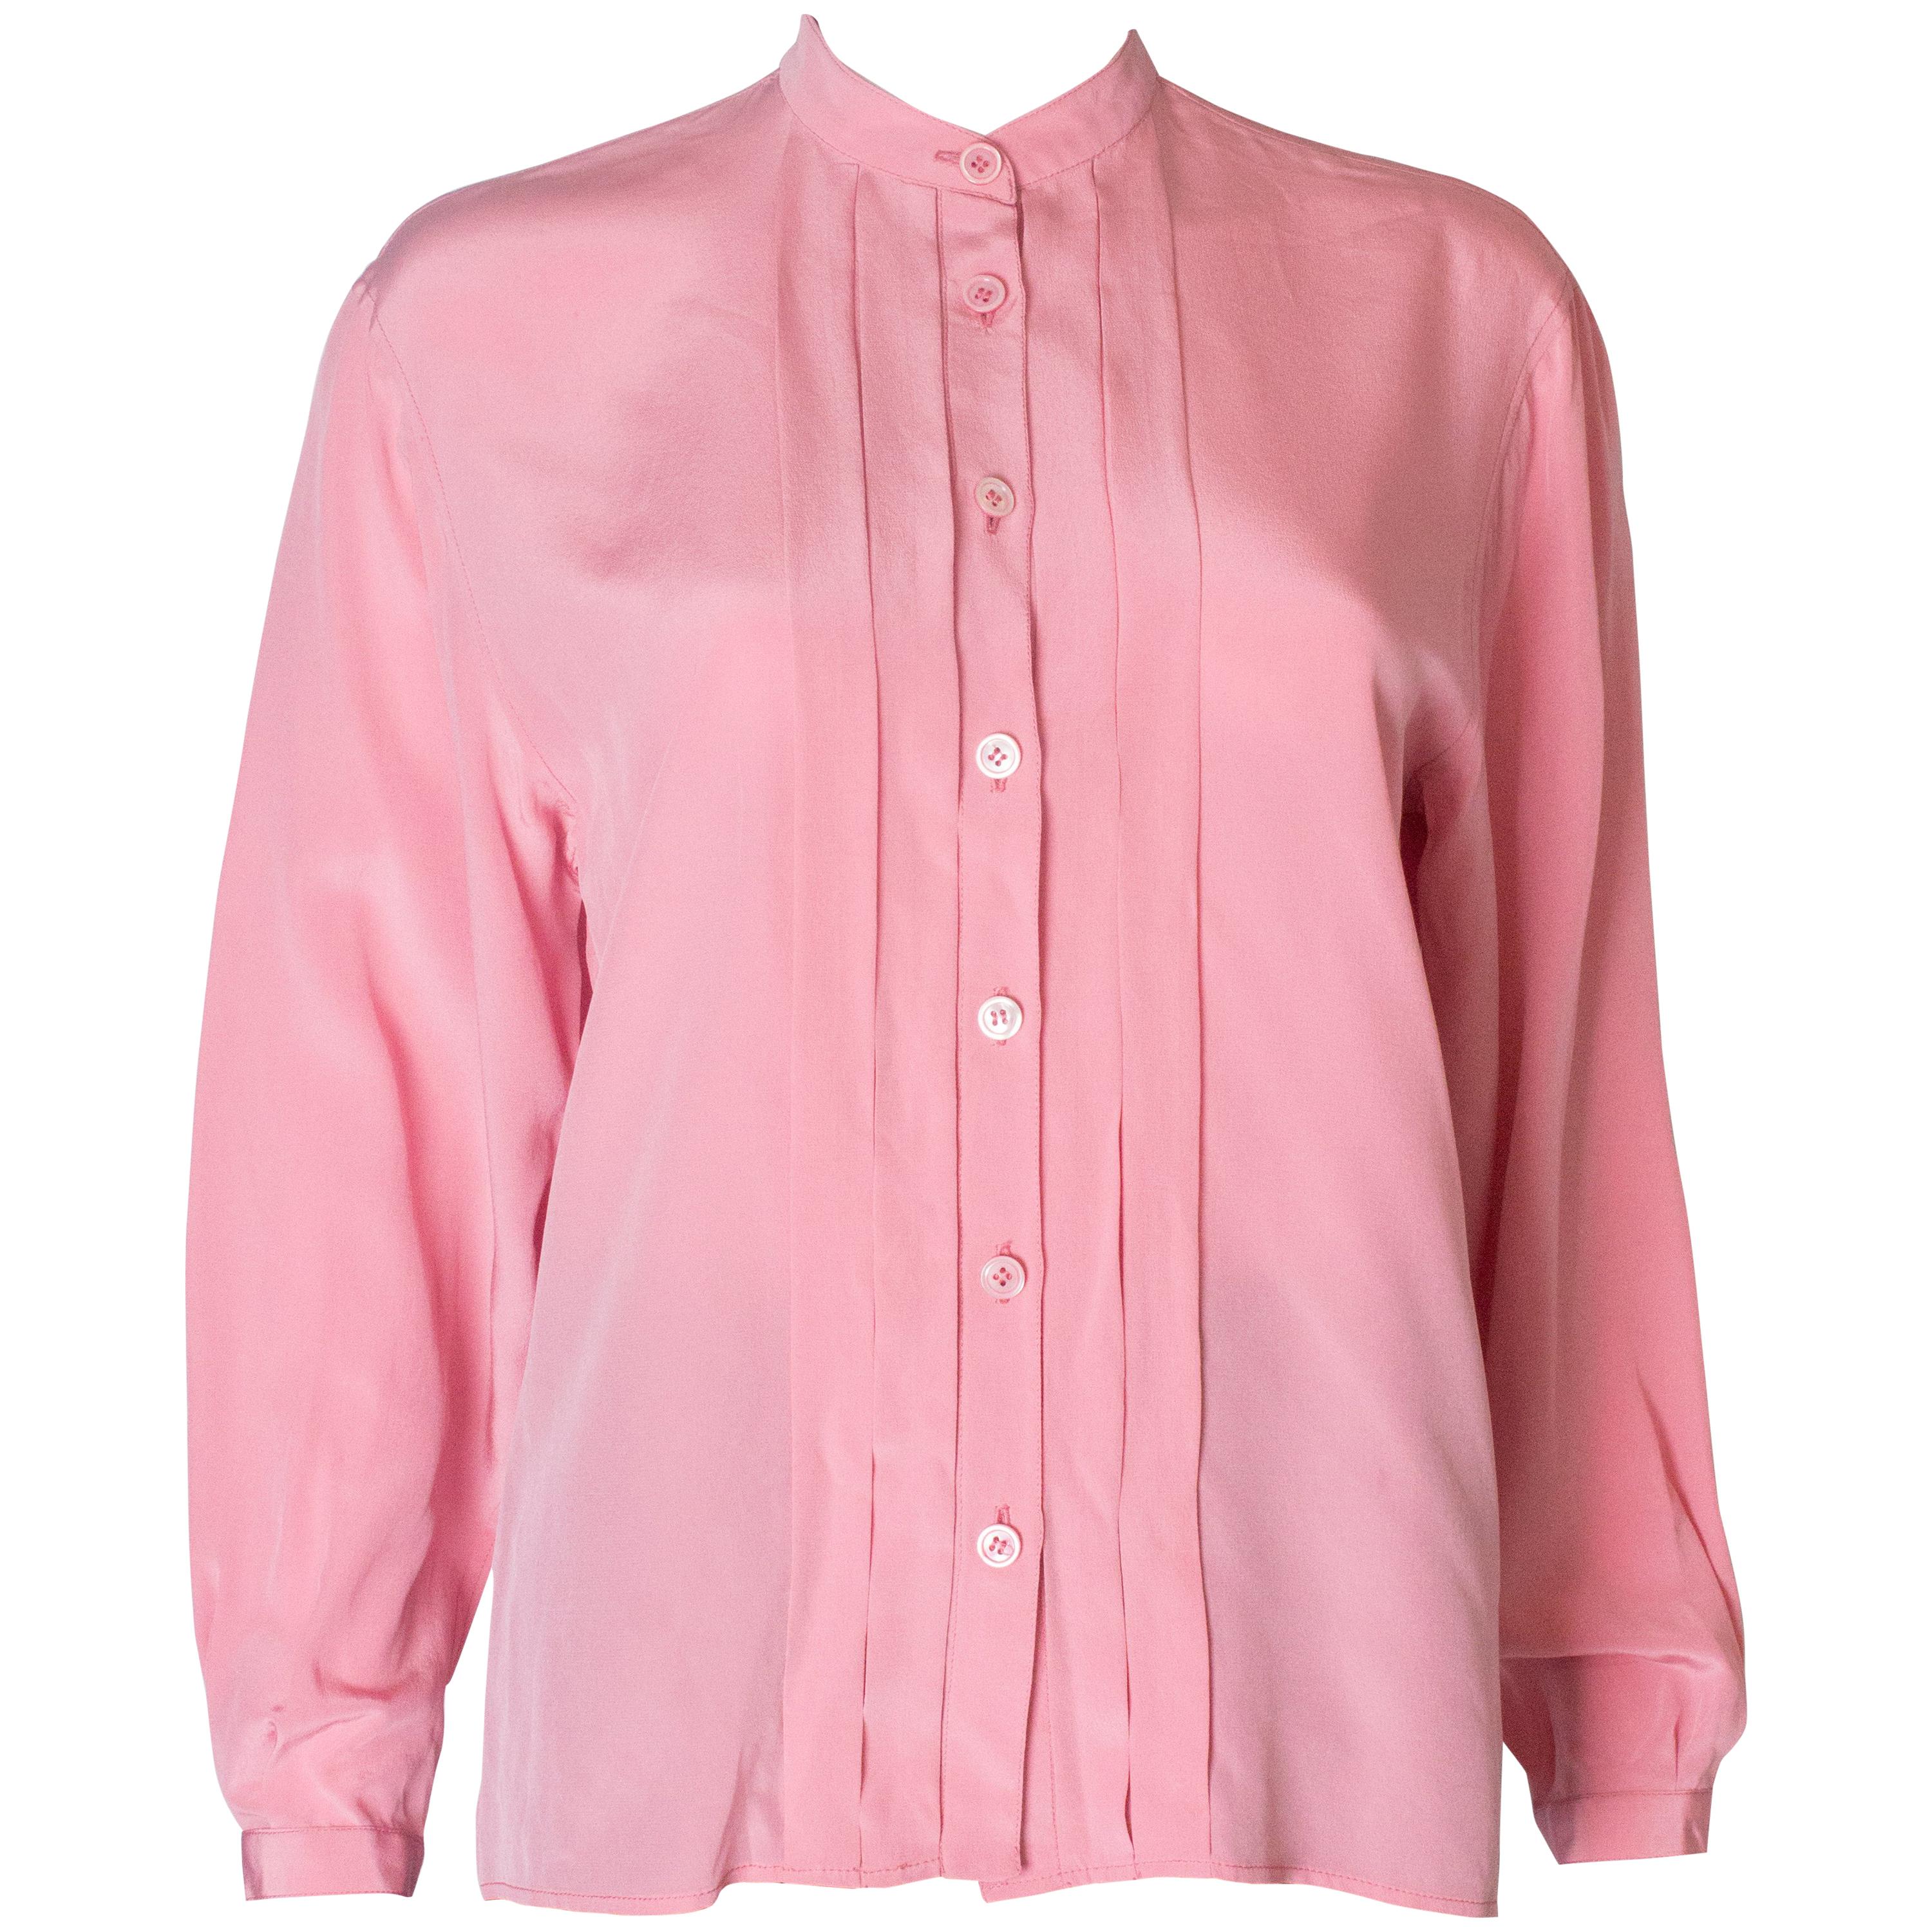 A Vintage 1990s pale pink silk button up blouse by Yves Saint Laurent 